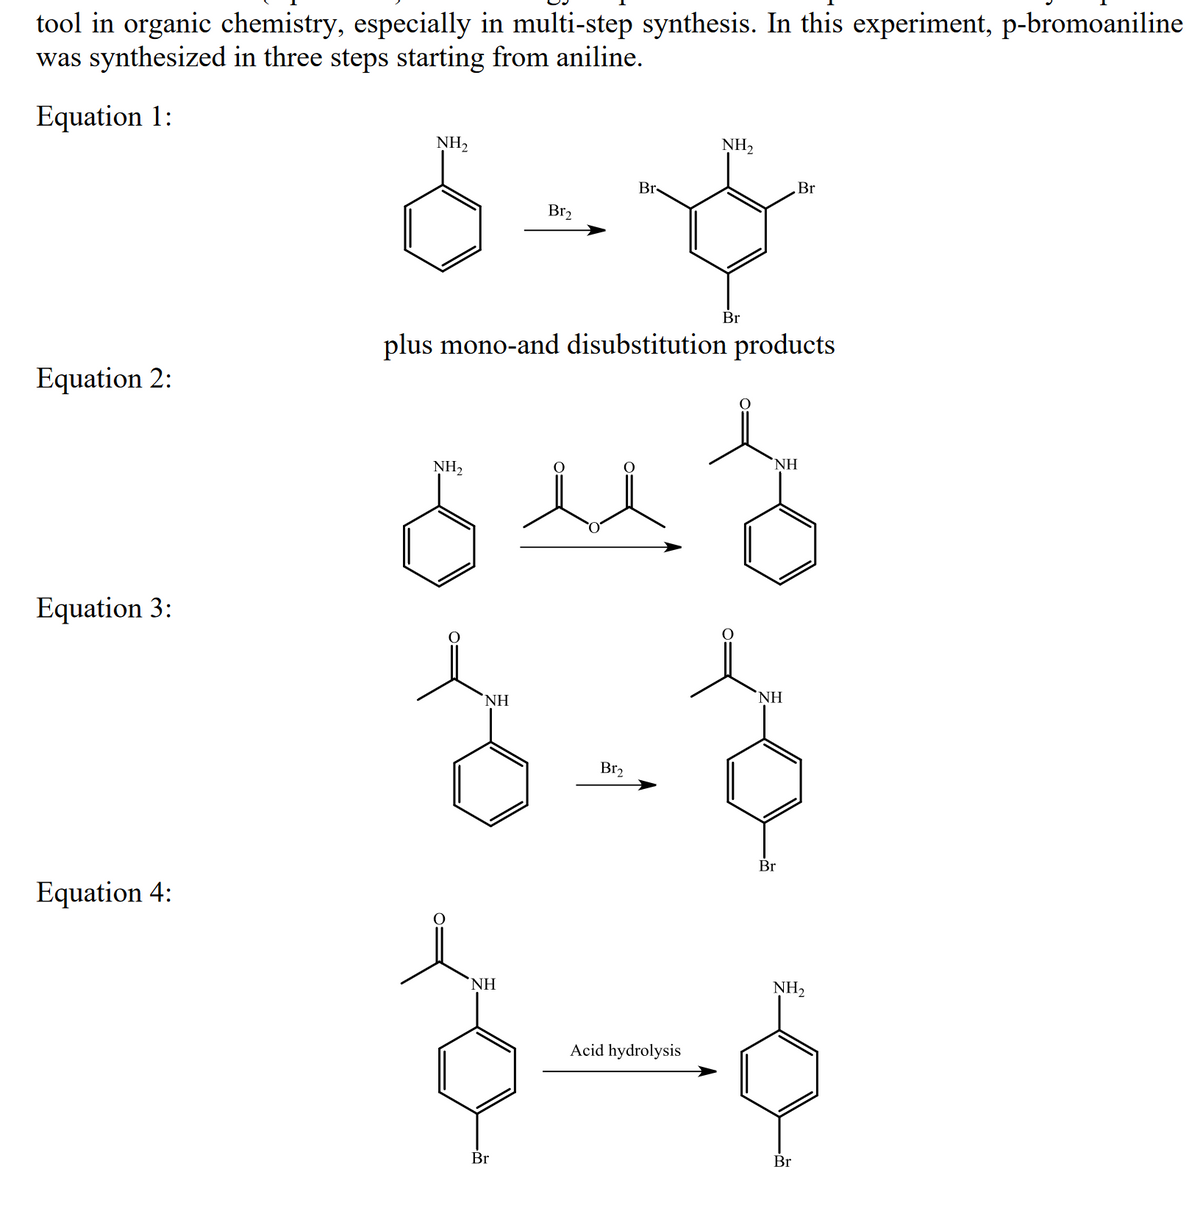 tool in organic chemistry, especially in multi-step synthesis. In this experiment, p-bromoaniline
was synthesized in three steps starting from aniline.
Equation 1:
NH2
NH,
Br-
Br
Br2
Br
plus mono-and disubstitution products
Equation 2:
NH2
NH
Equation 3:
`NH
NH
Br2
Br
Equation 4:
NH
NH2
Acid hydrolysis
Br
Br
